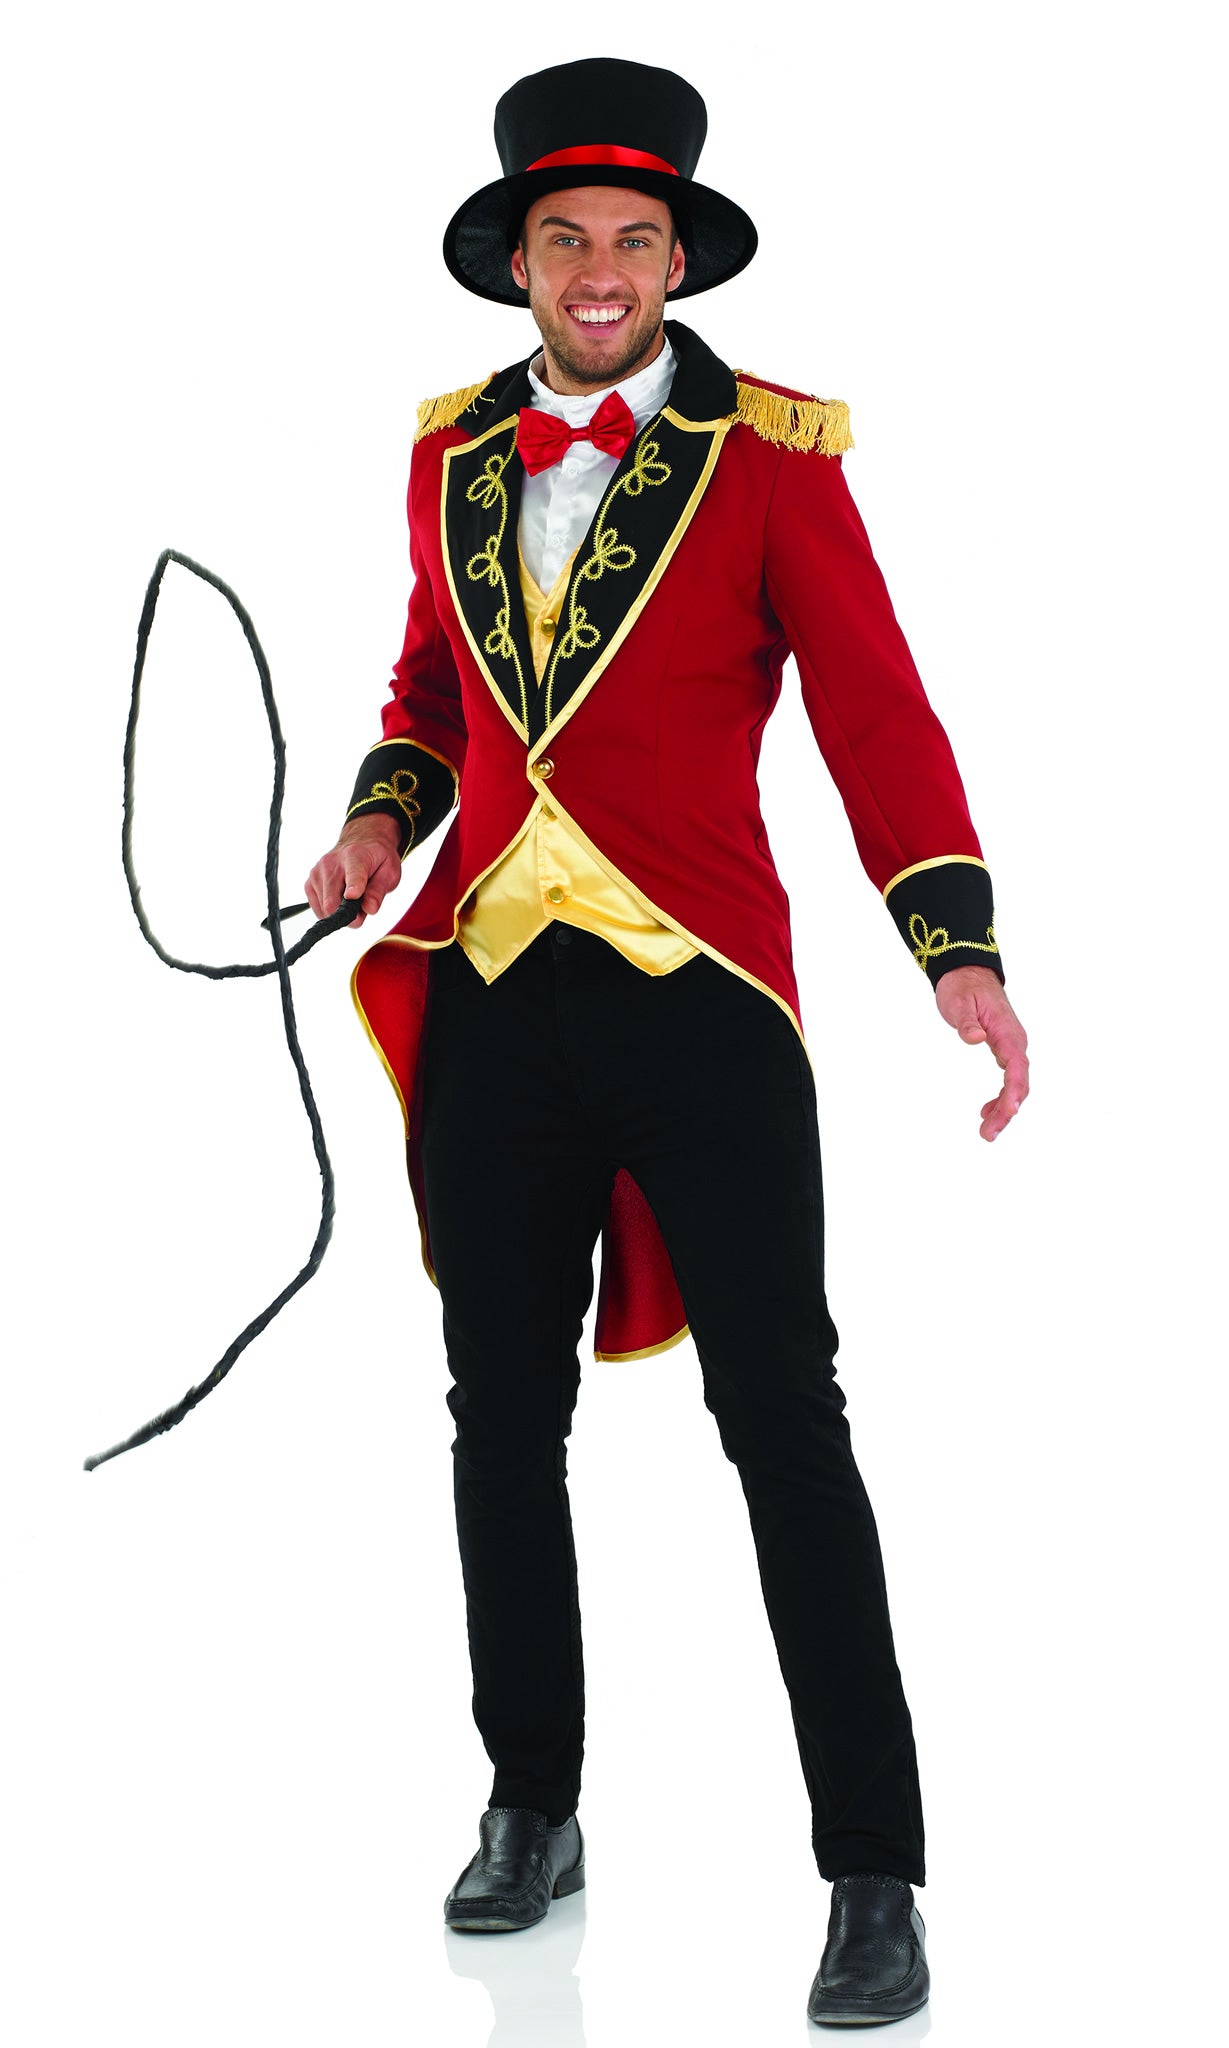 Red ringmaster jacket with attached waistcoat, shirt front, tie and hat